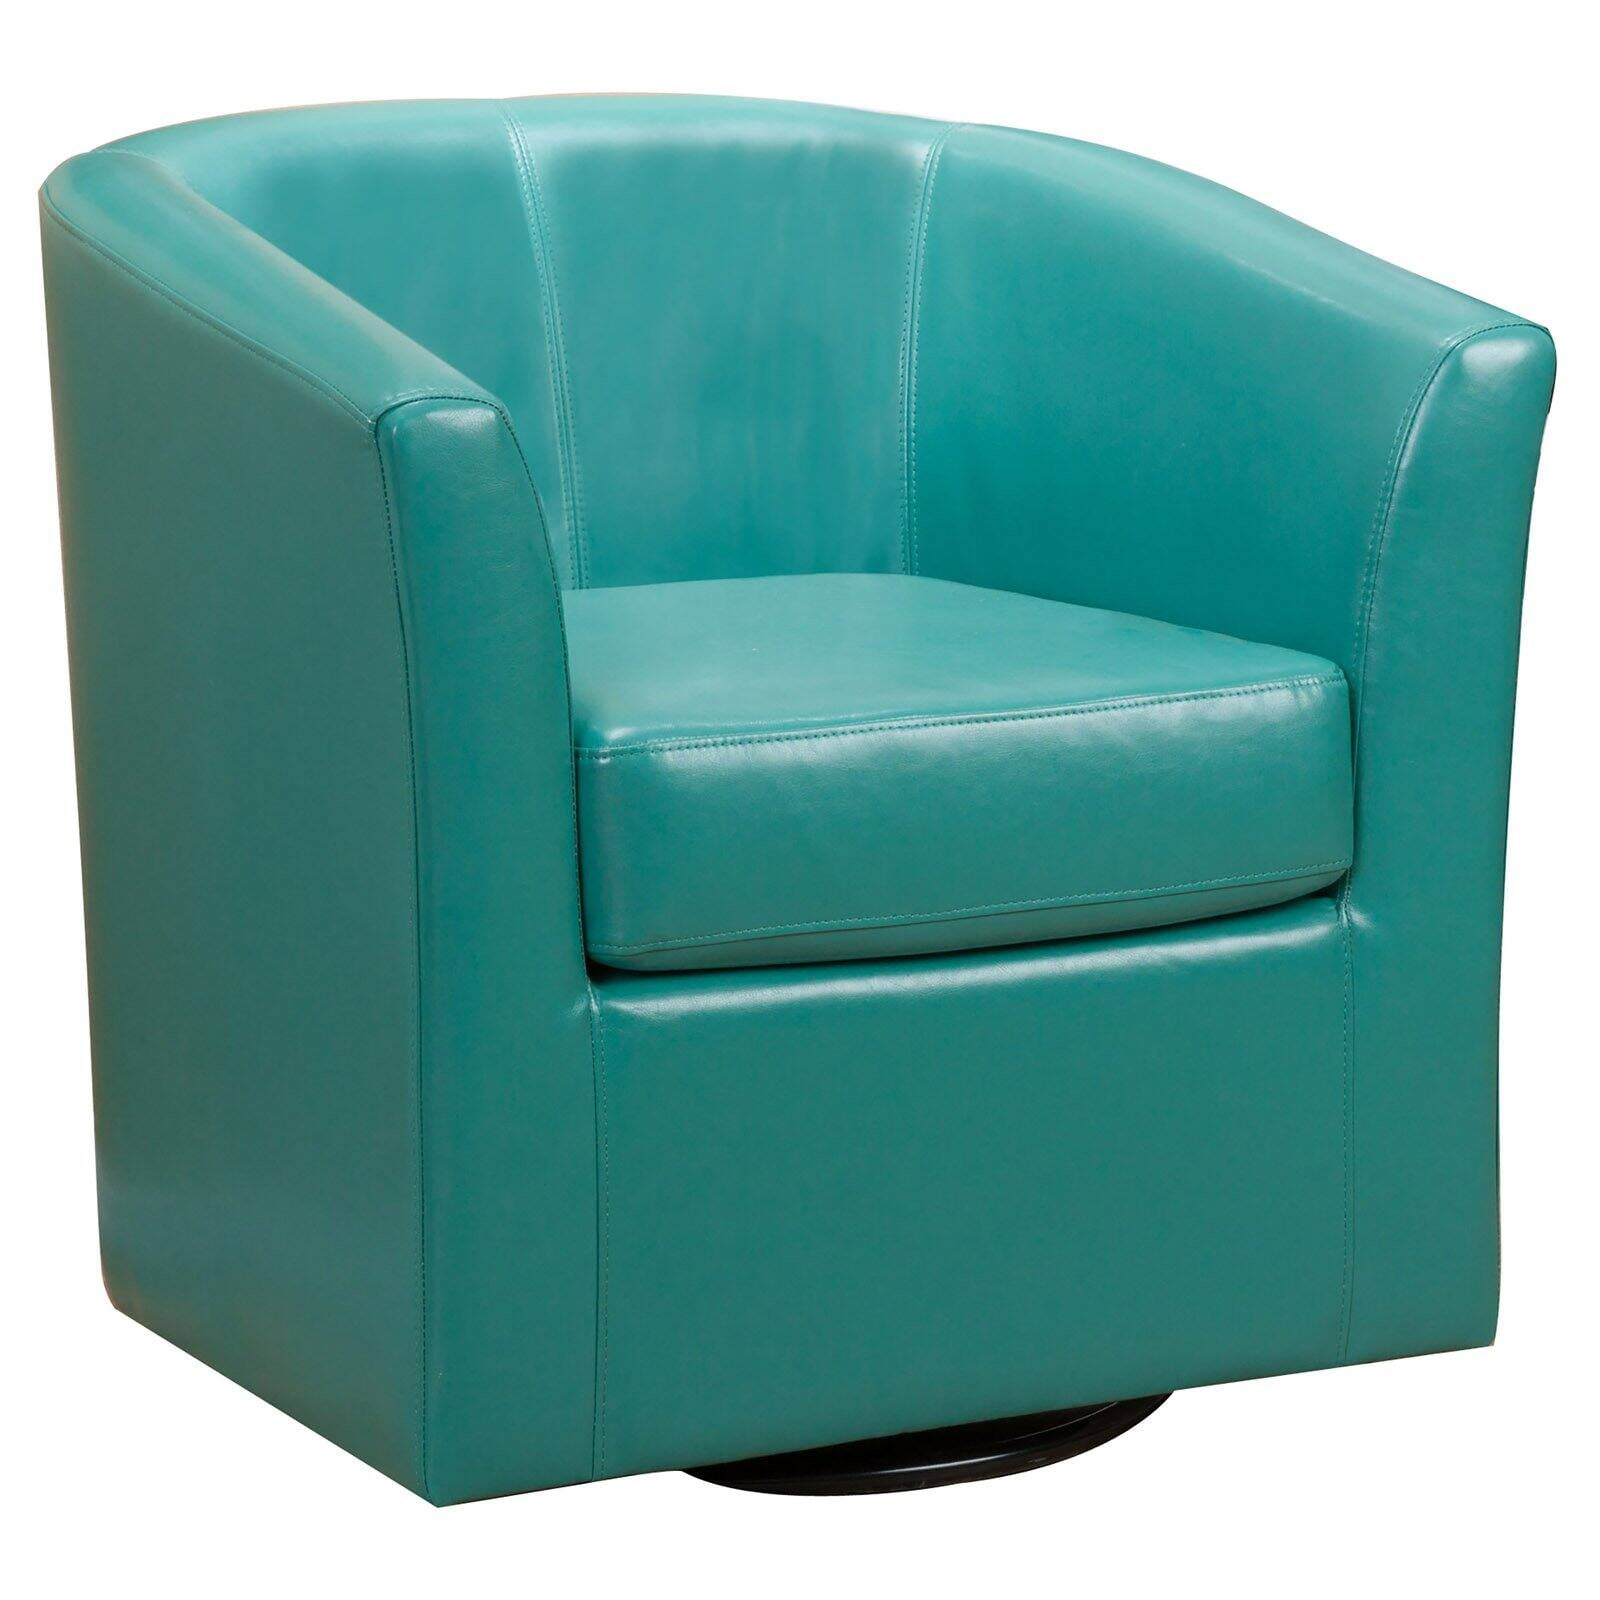 Swivel Barrel Chair Com, Small Swivel Chairs With Arms